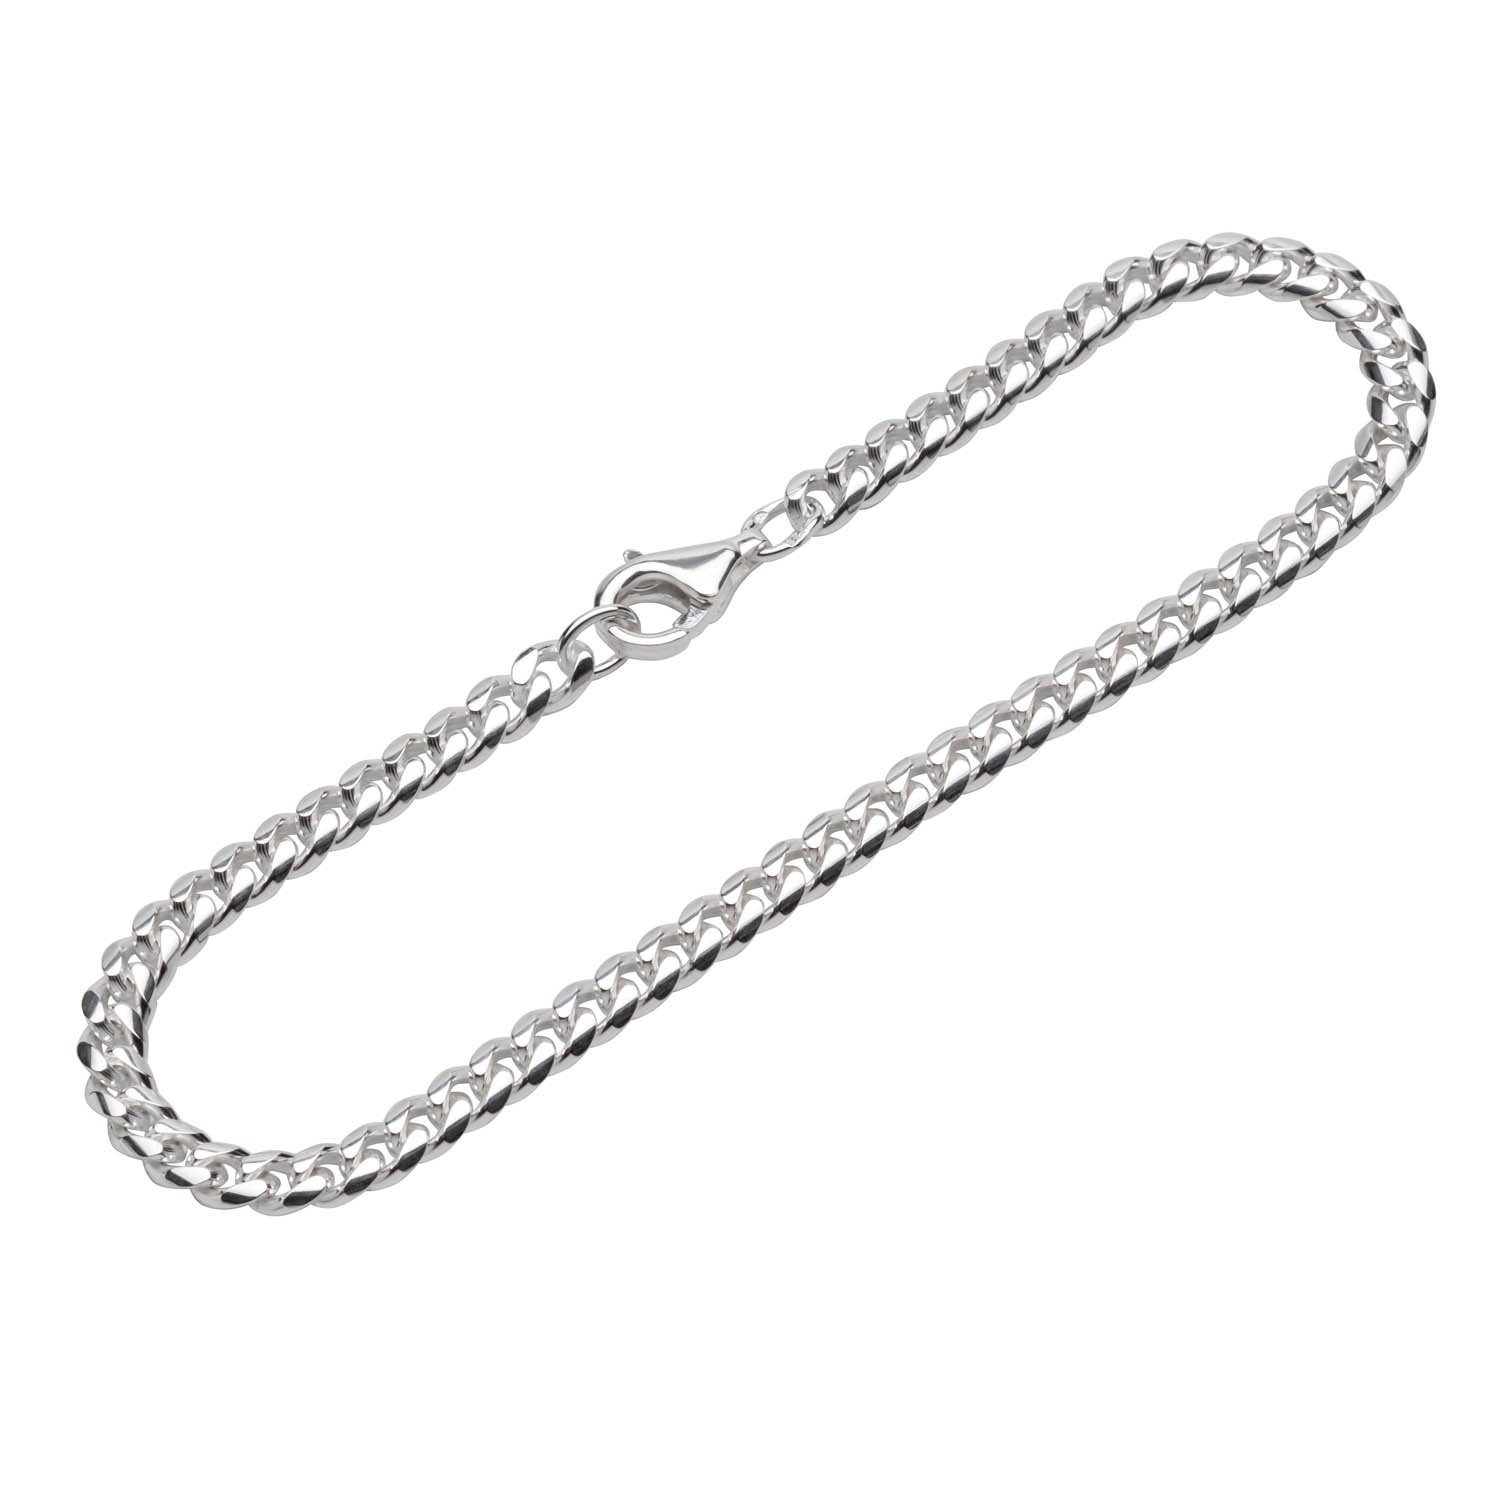 NKlaus Silberarmband Armband Silber 925 Made Stück), in Germany oval (1 19cm Sterling Panzerkette